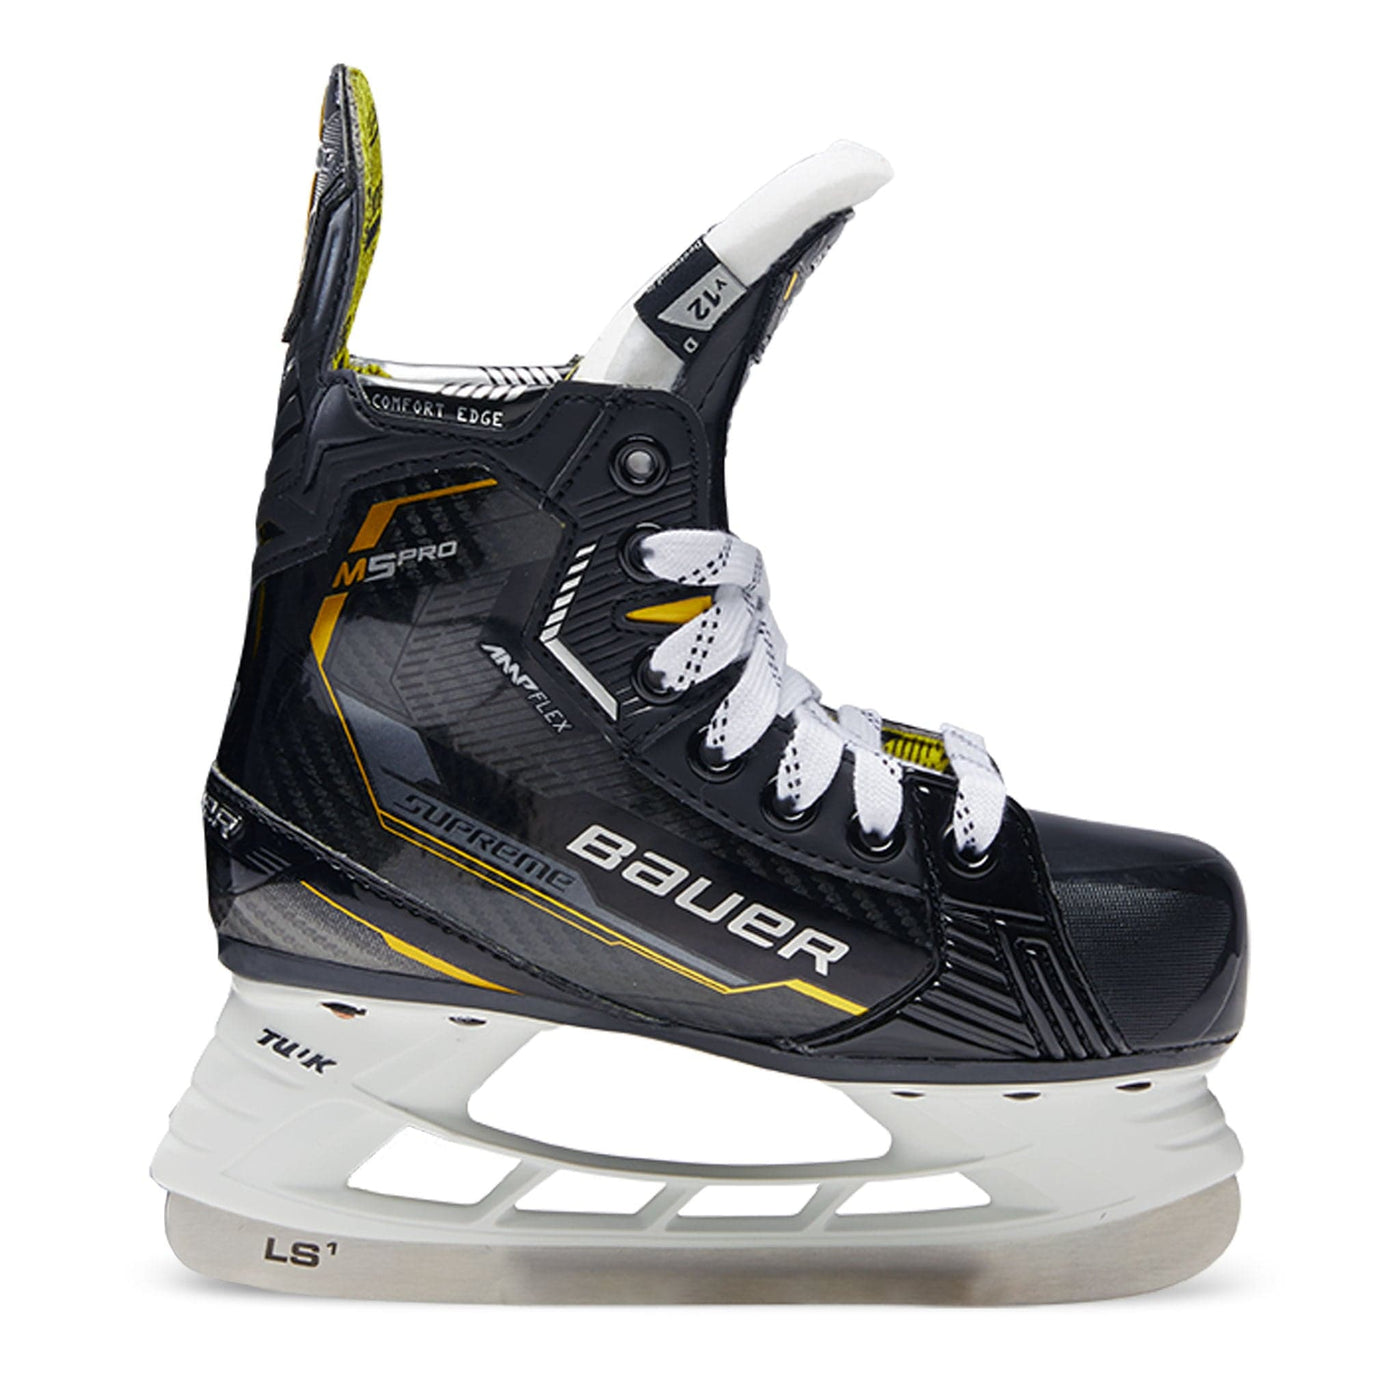 Bauer Supreme M5 Pro Youth Hockey Skates - The Hockey Shop Source For Sports